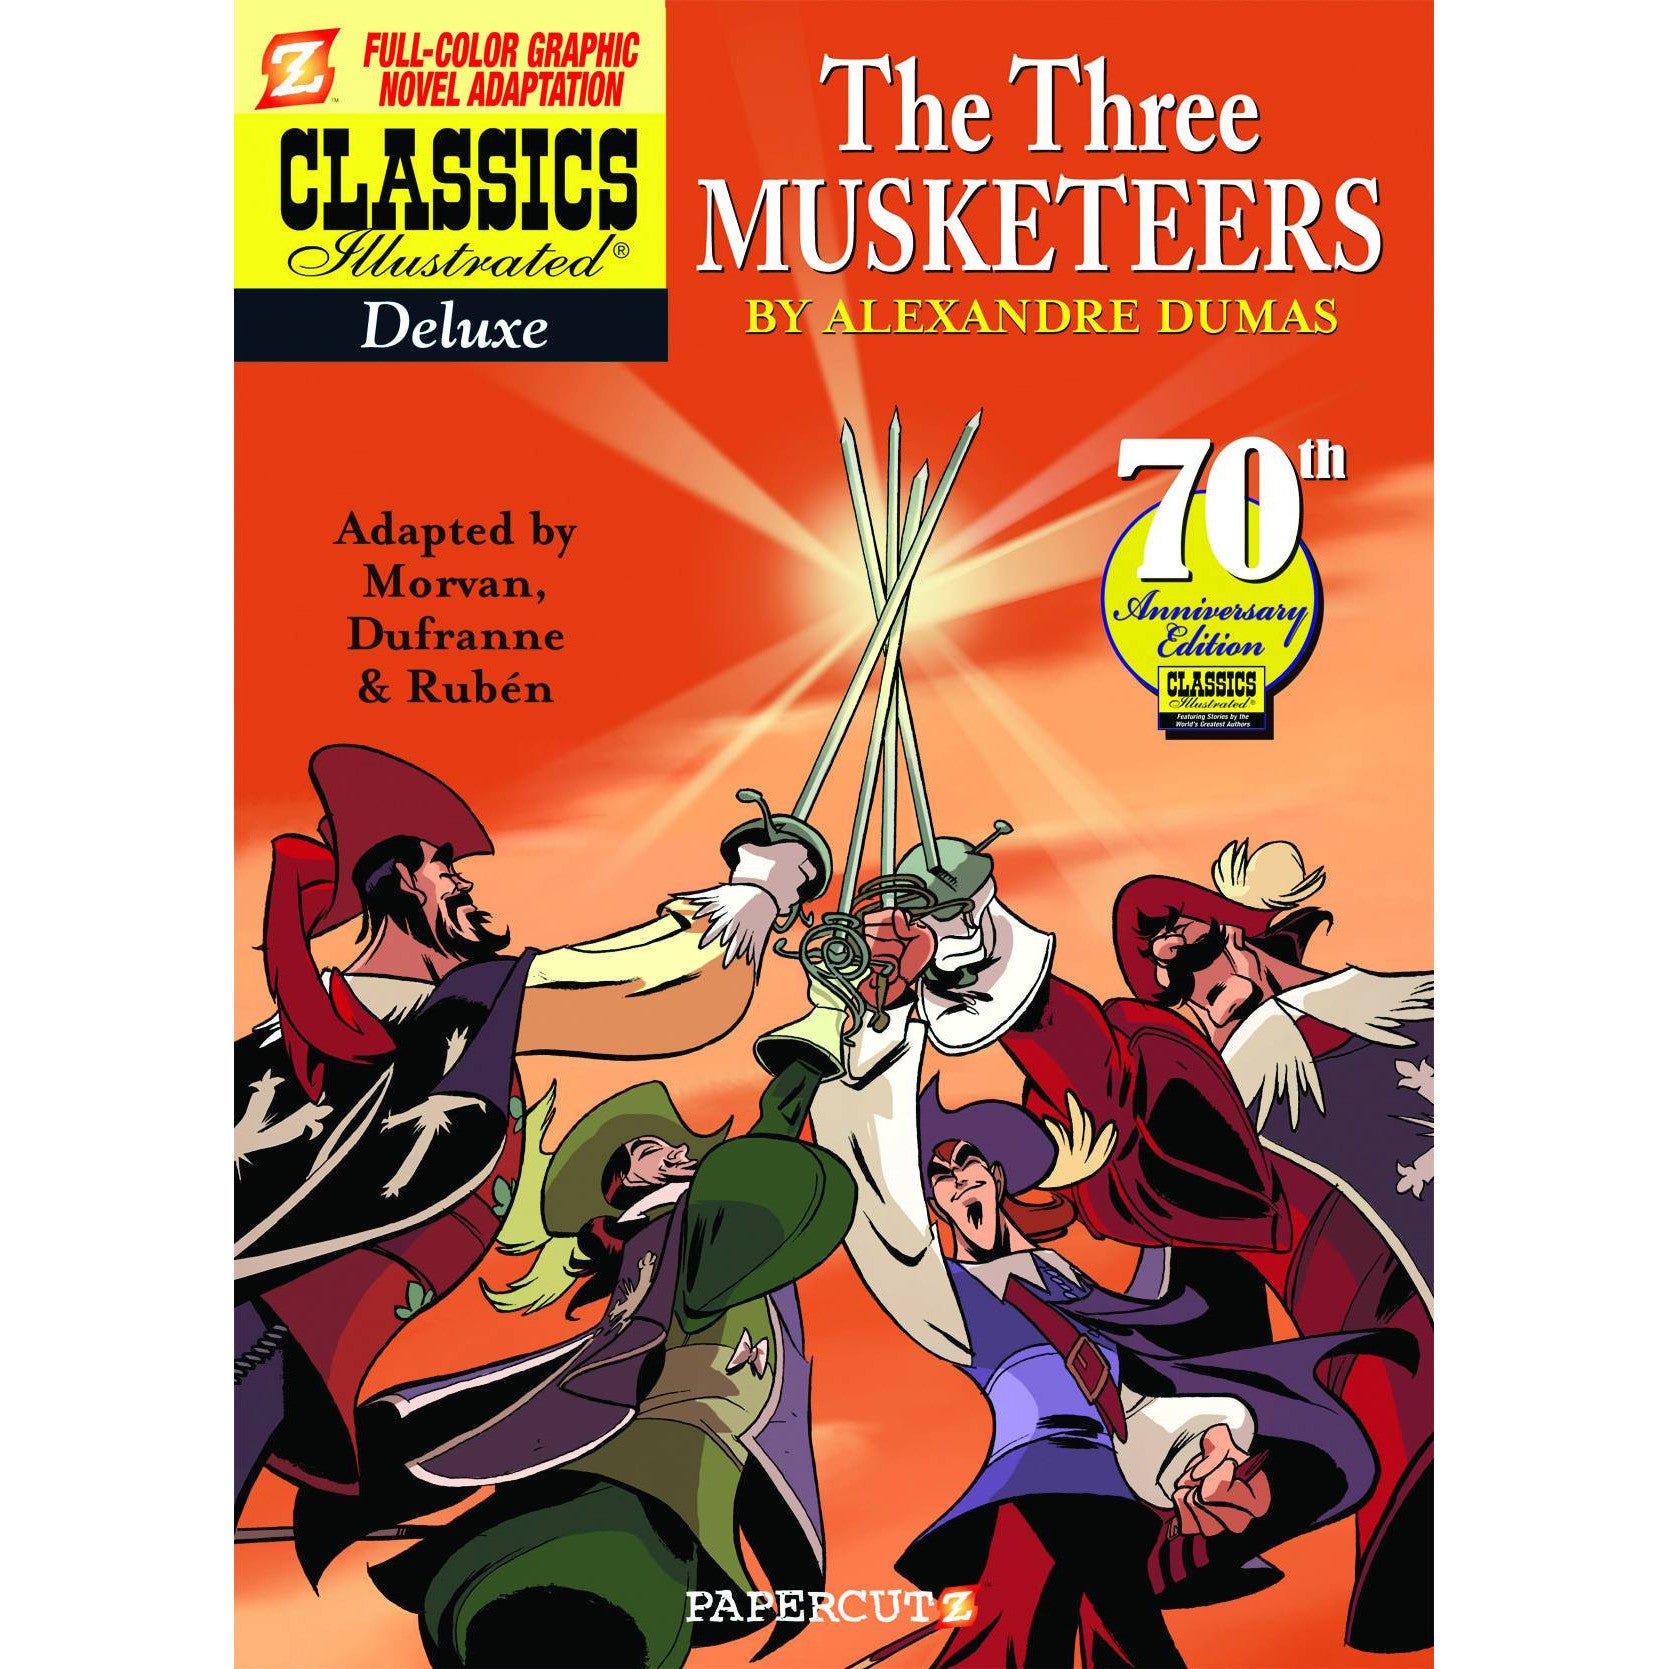  The Three Musketeers Illustrated Deluxe TP Uncanny!